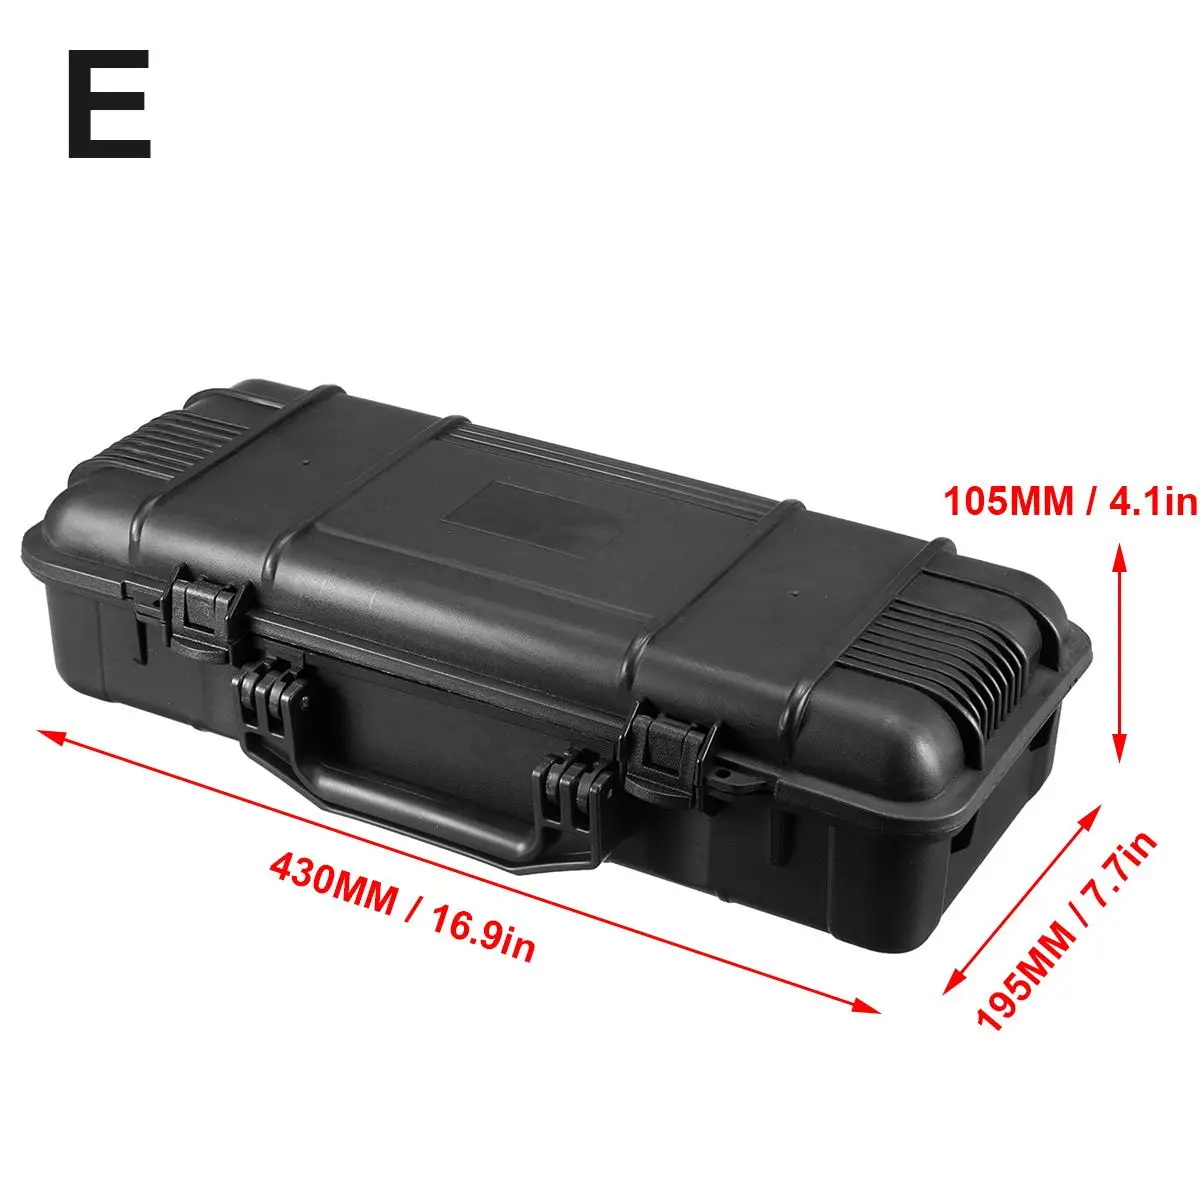 6 Sizes Waterproof Hard Carry Case Bag Tool Kits with Sponge Storage Box Safety Protector Organizer Hardware Toolbox top tool chest Tool Storage Items